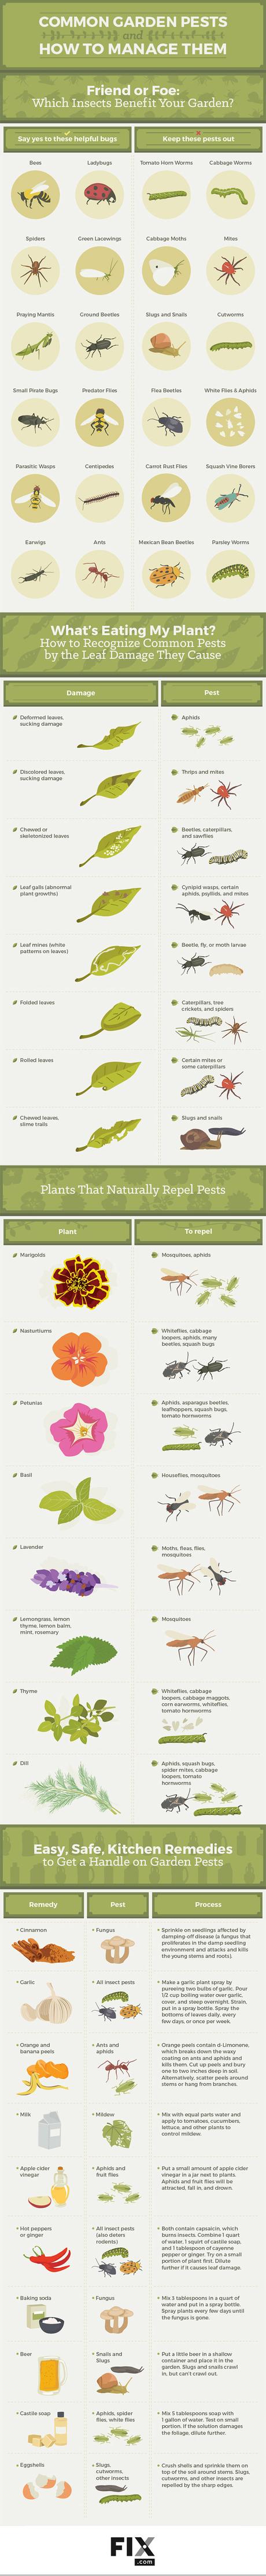 Common Garden Pests and How to Manage Them Infographic